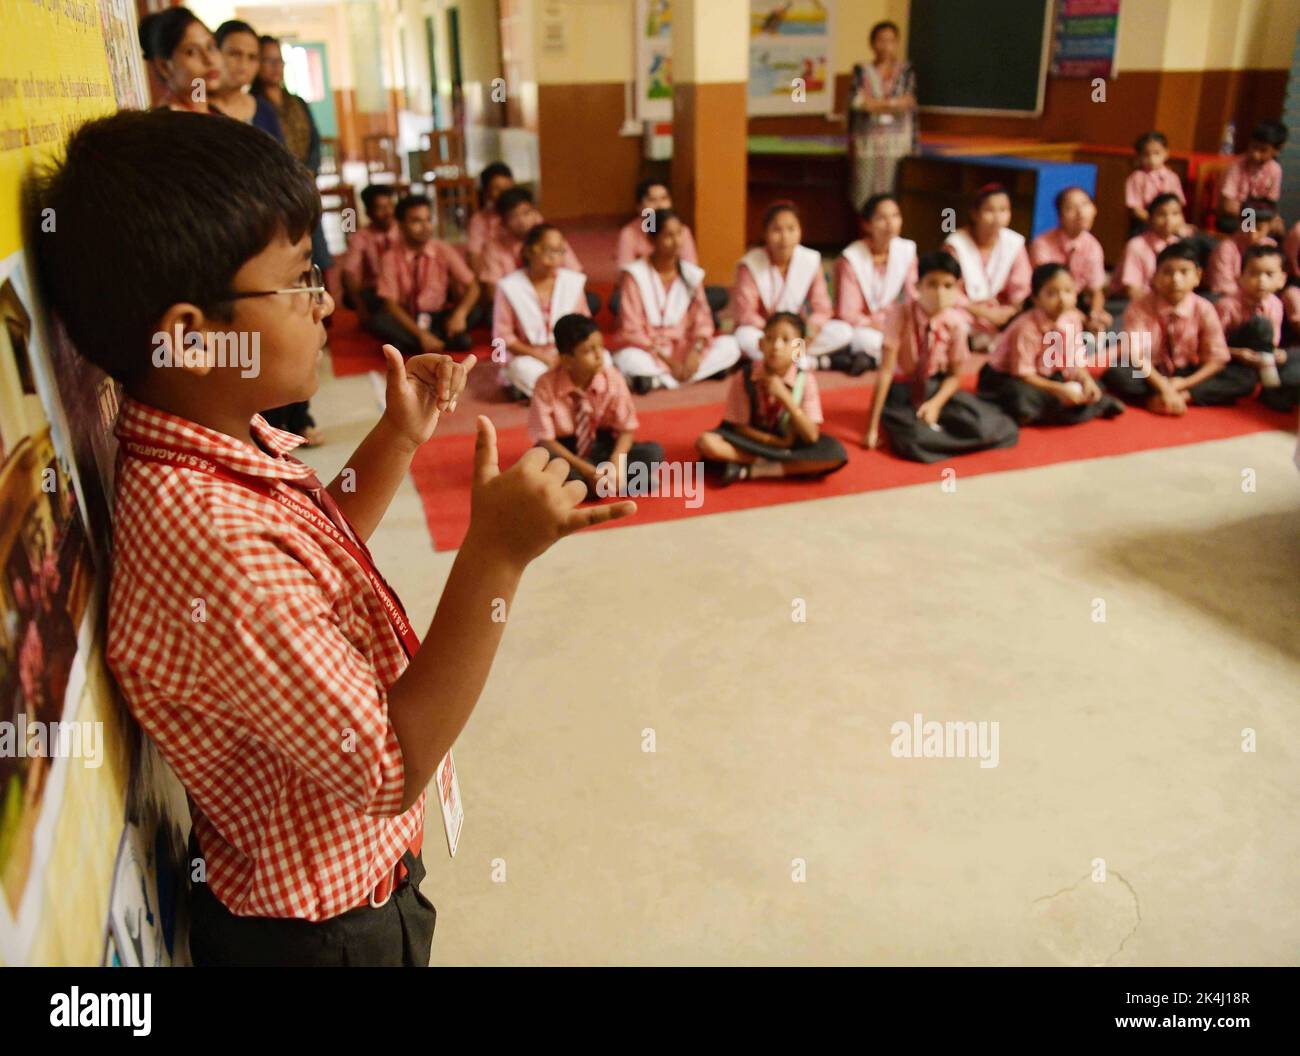 Students of Ferando School for Speech & Hearing participate at a competition on sign languages on the occasion of International Day of Sign Languages, at a school in Agartala. Tripura, India. Stock Photo